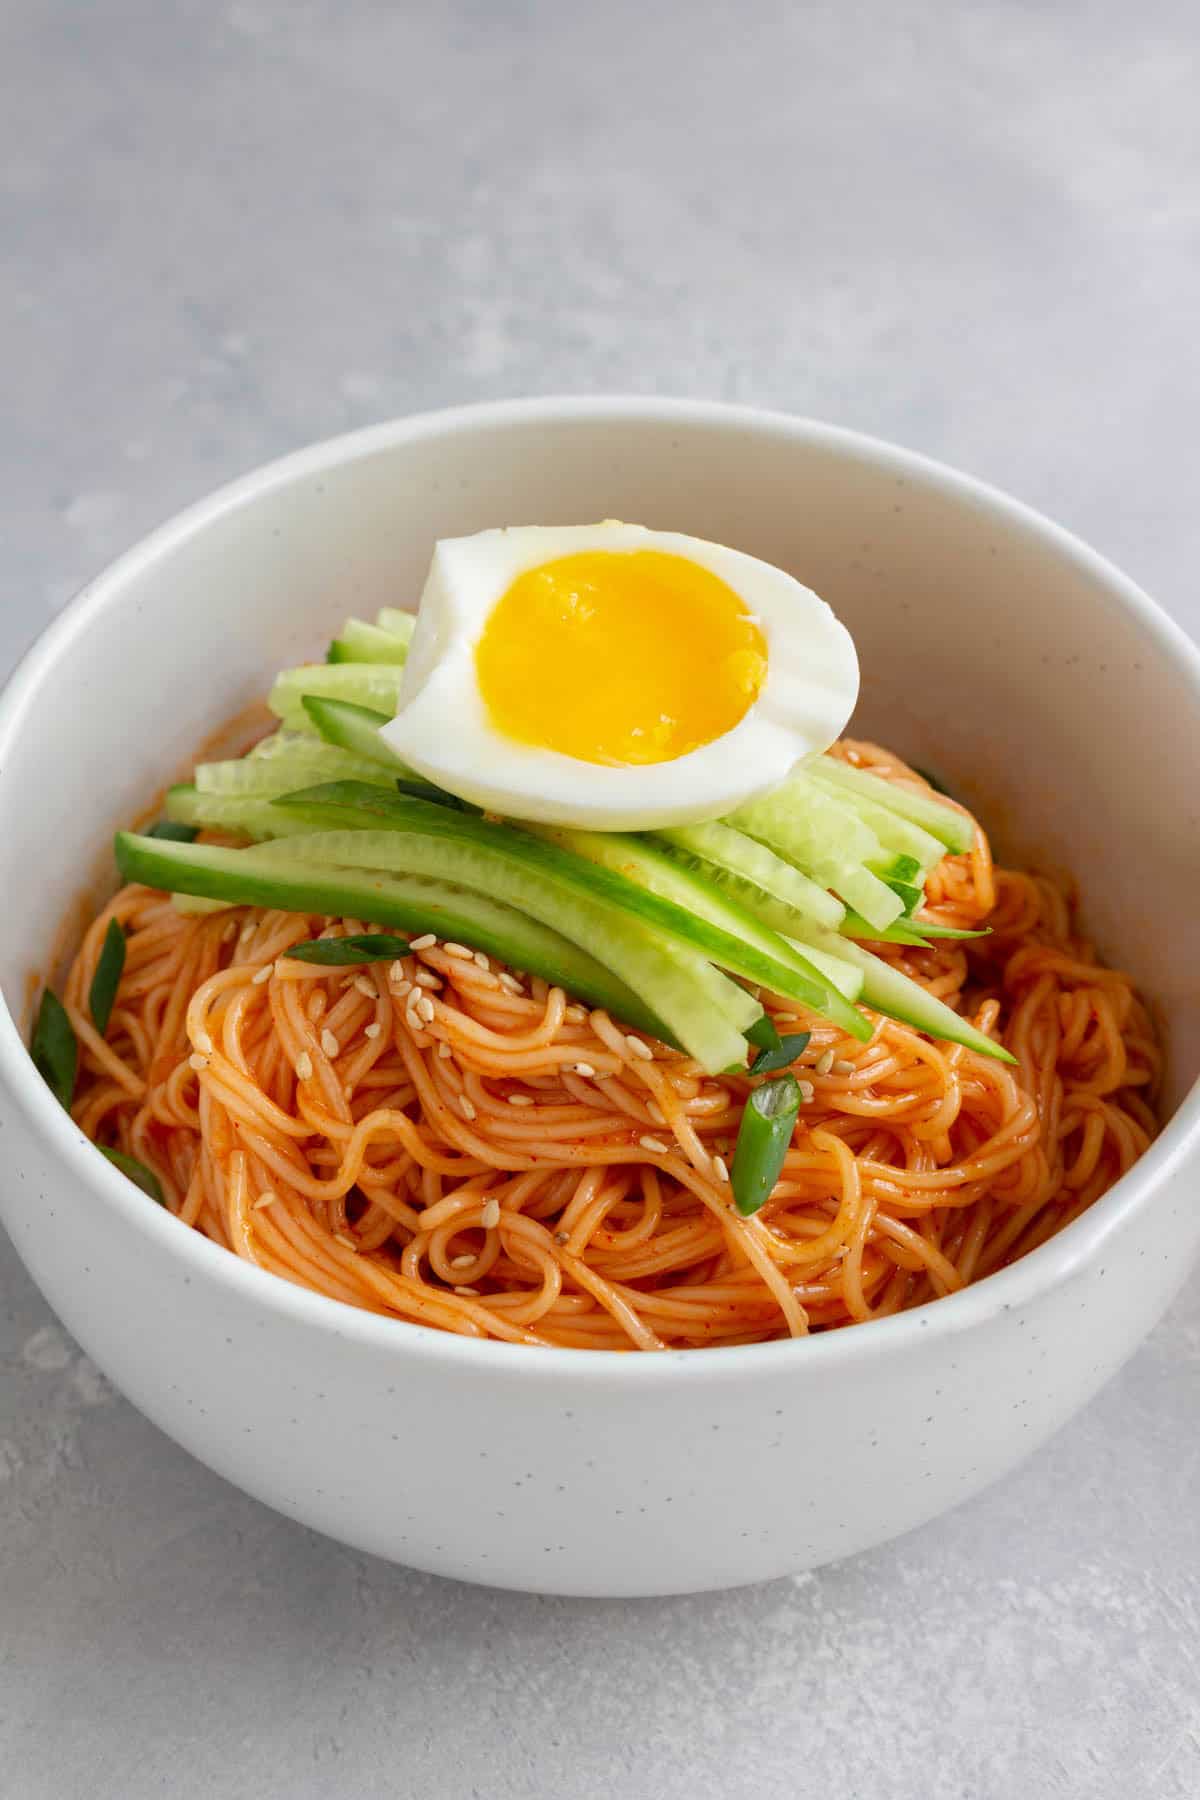 A bowl of bibim guksu with sliced cucumbers and half an egg on top.